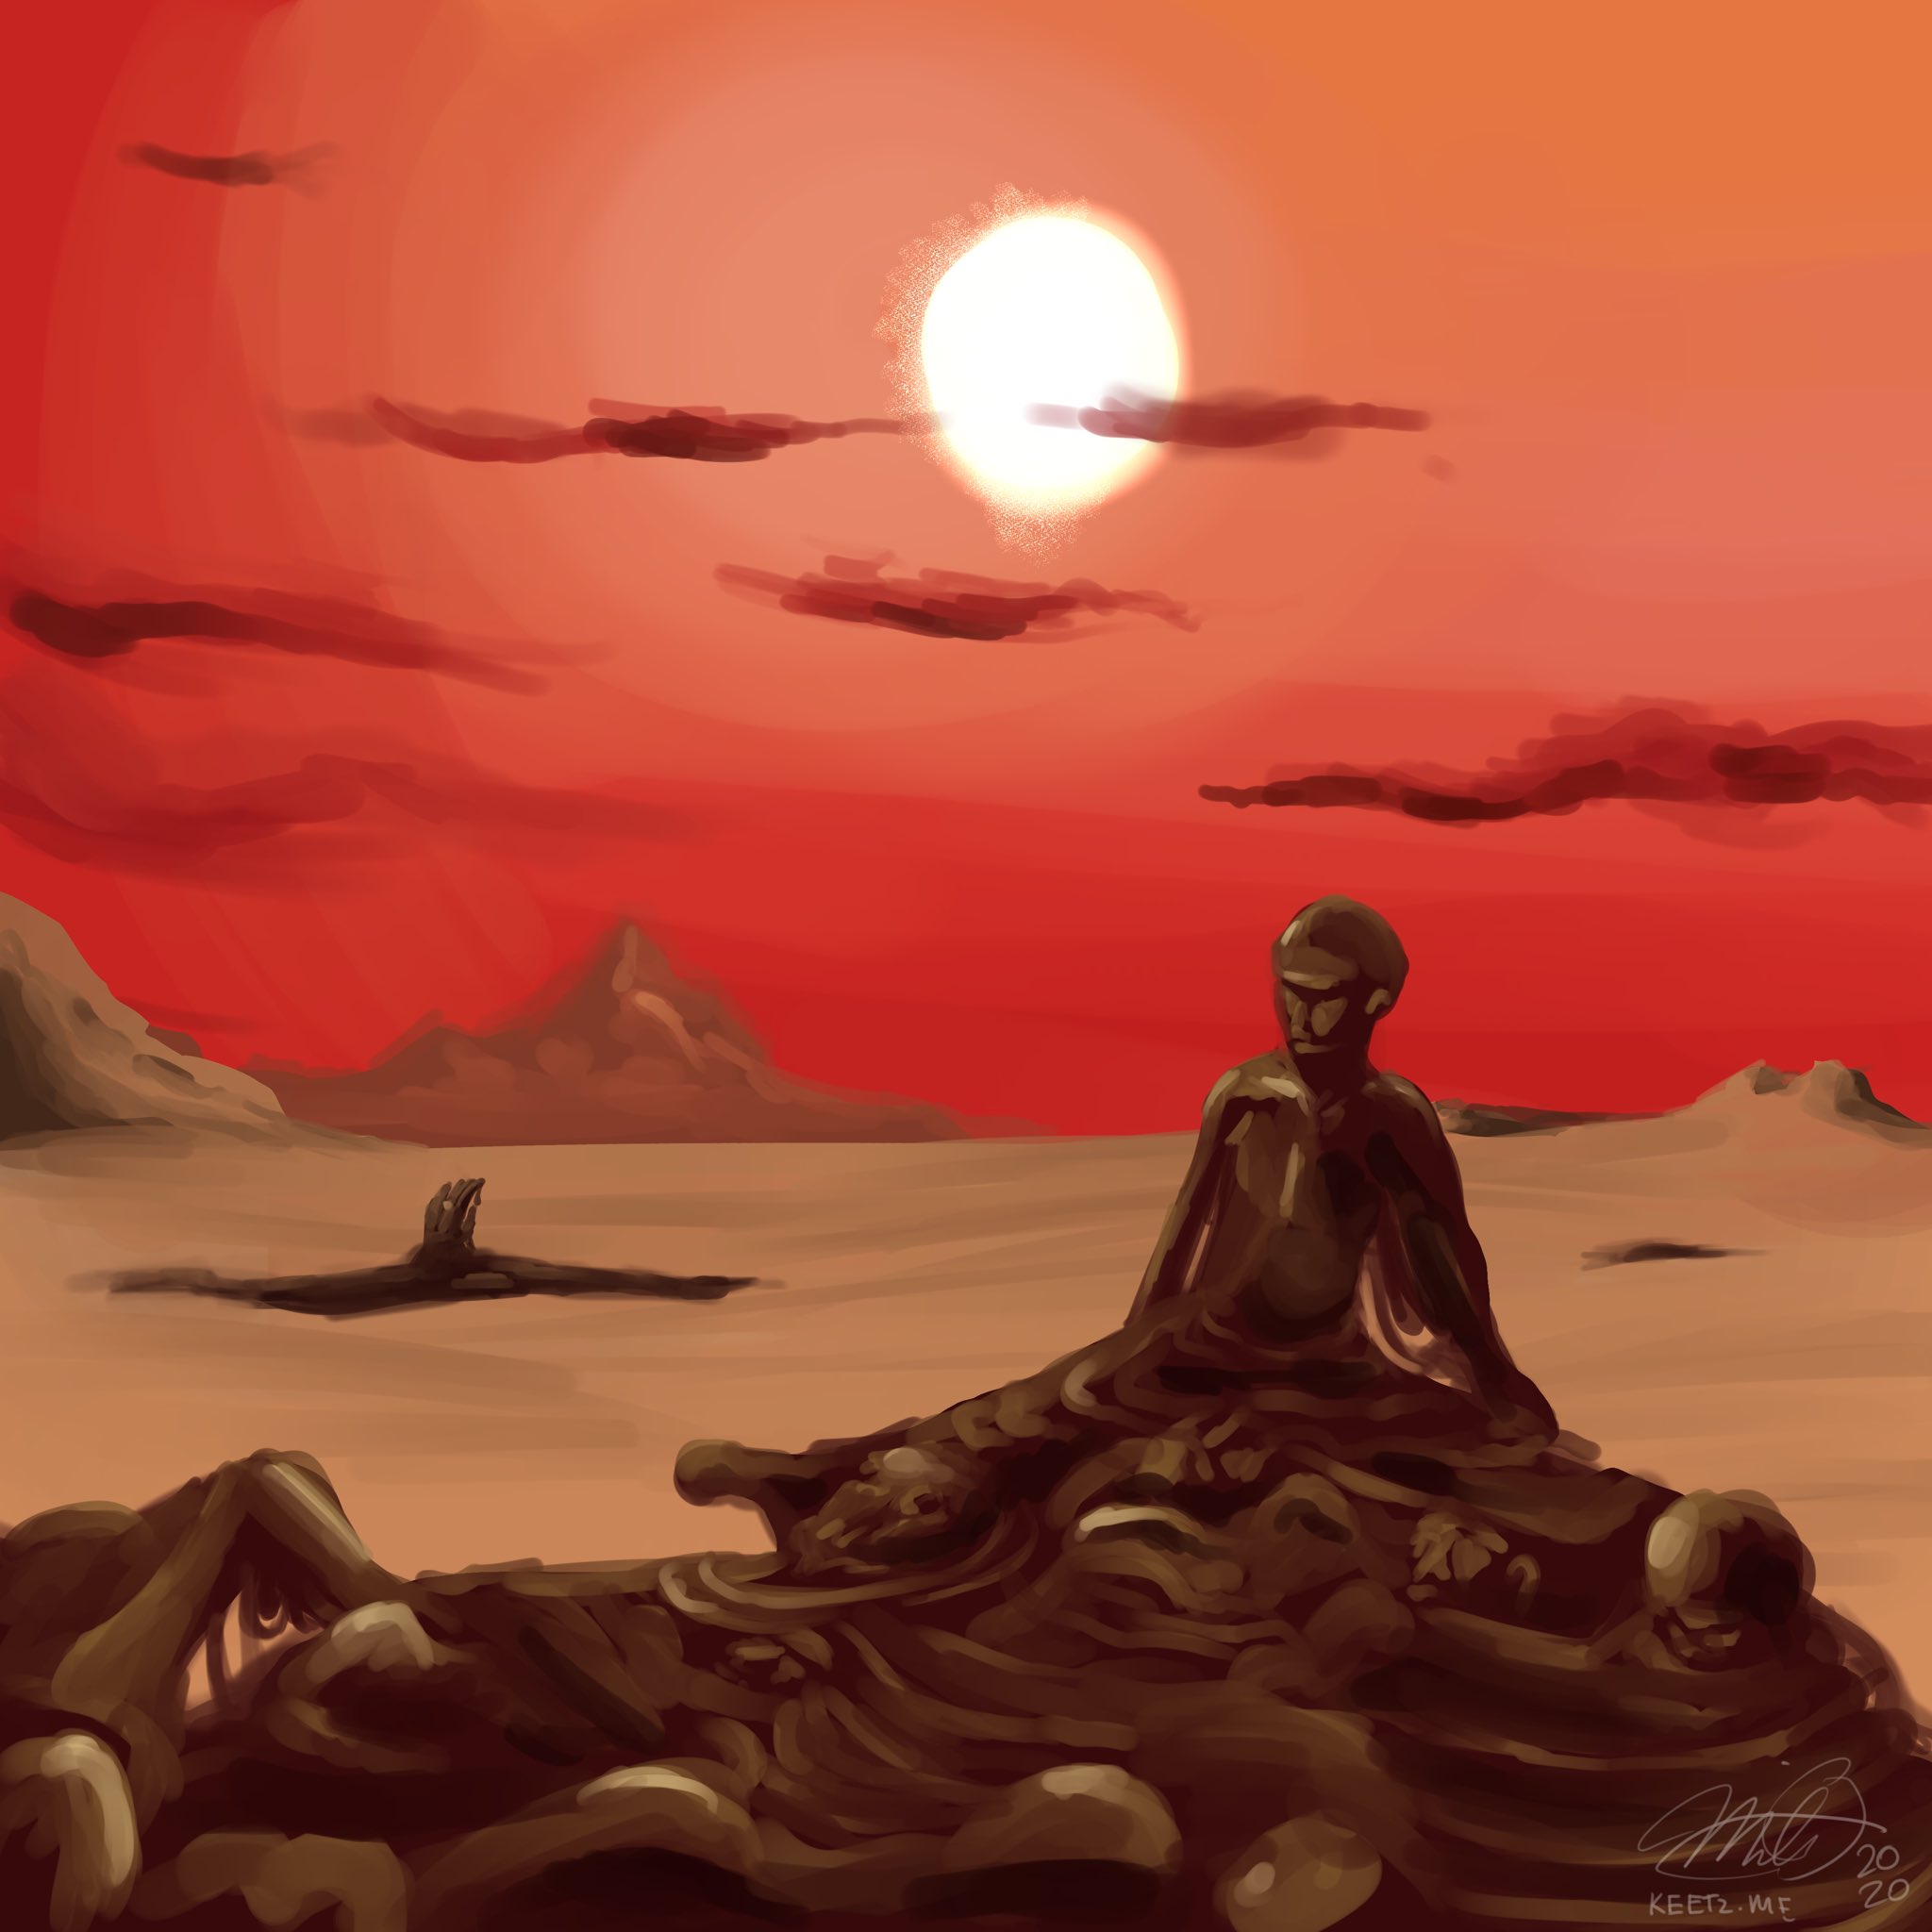 milo on X: Gonna be drawing the SCP-001 proposals in my free time. This is  S. D. Locke's proposal, “When Day Breaks” #scp #scpfoundation #scpfanart   / X